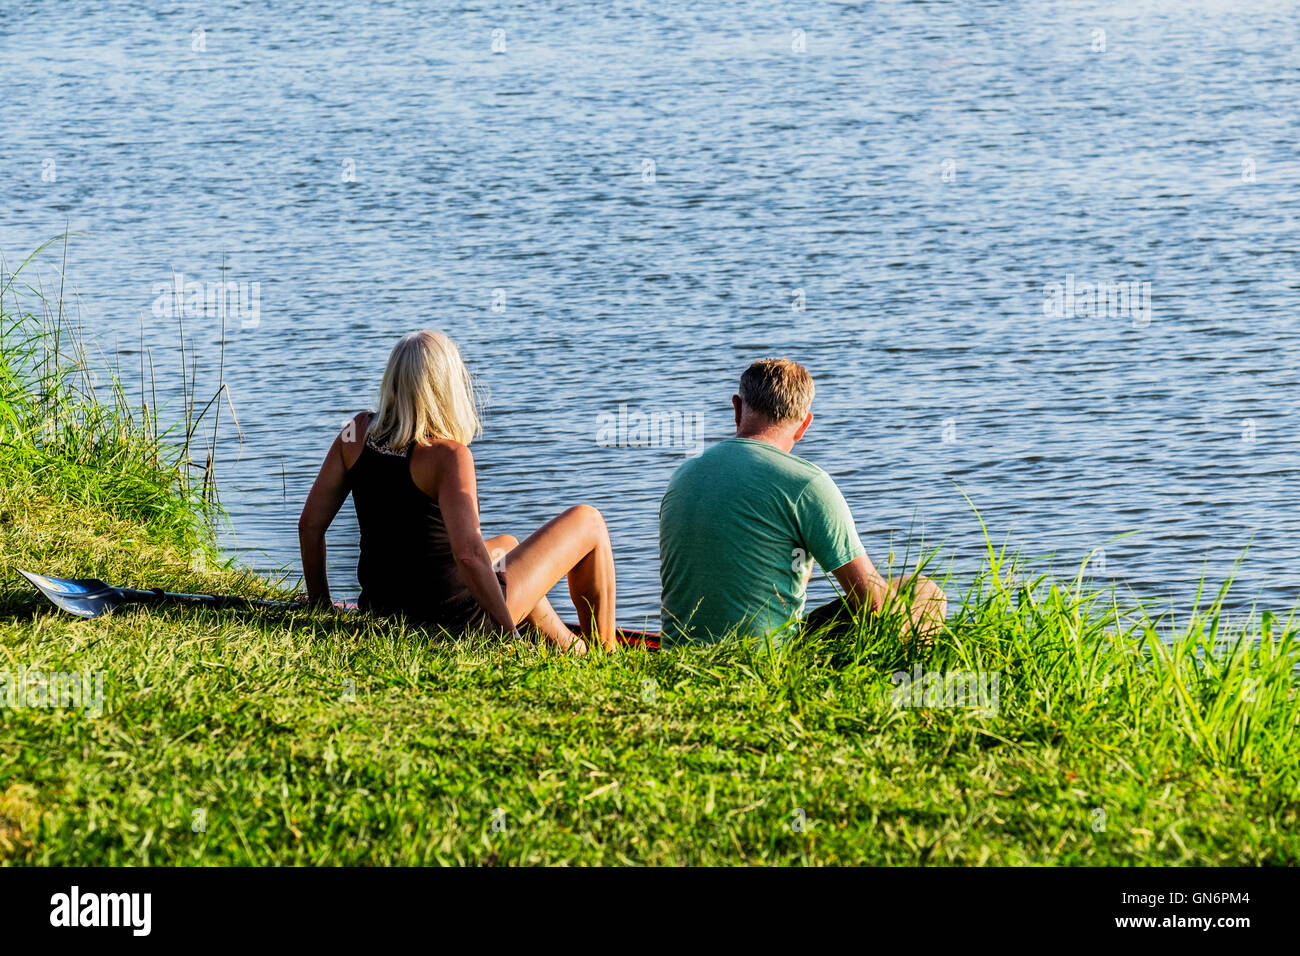 A middle aged Caucasian man and woman prepare to get in a conoe on the North Canadian river in evening light. Oklahoma, USA. Stock Photo